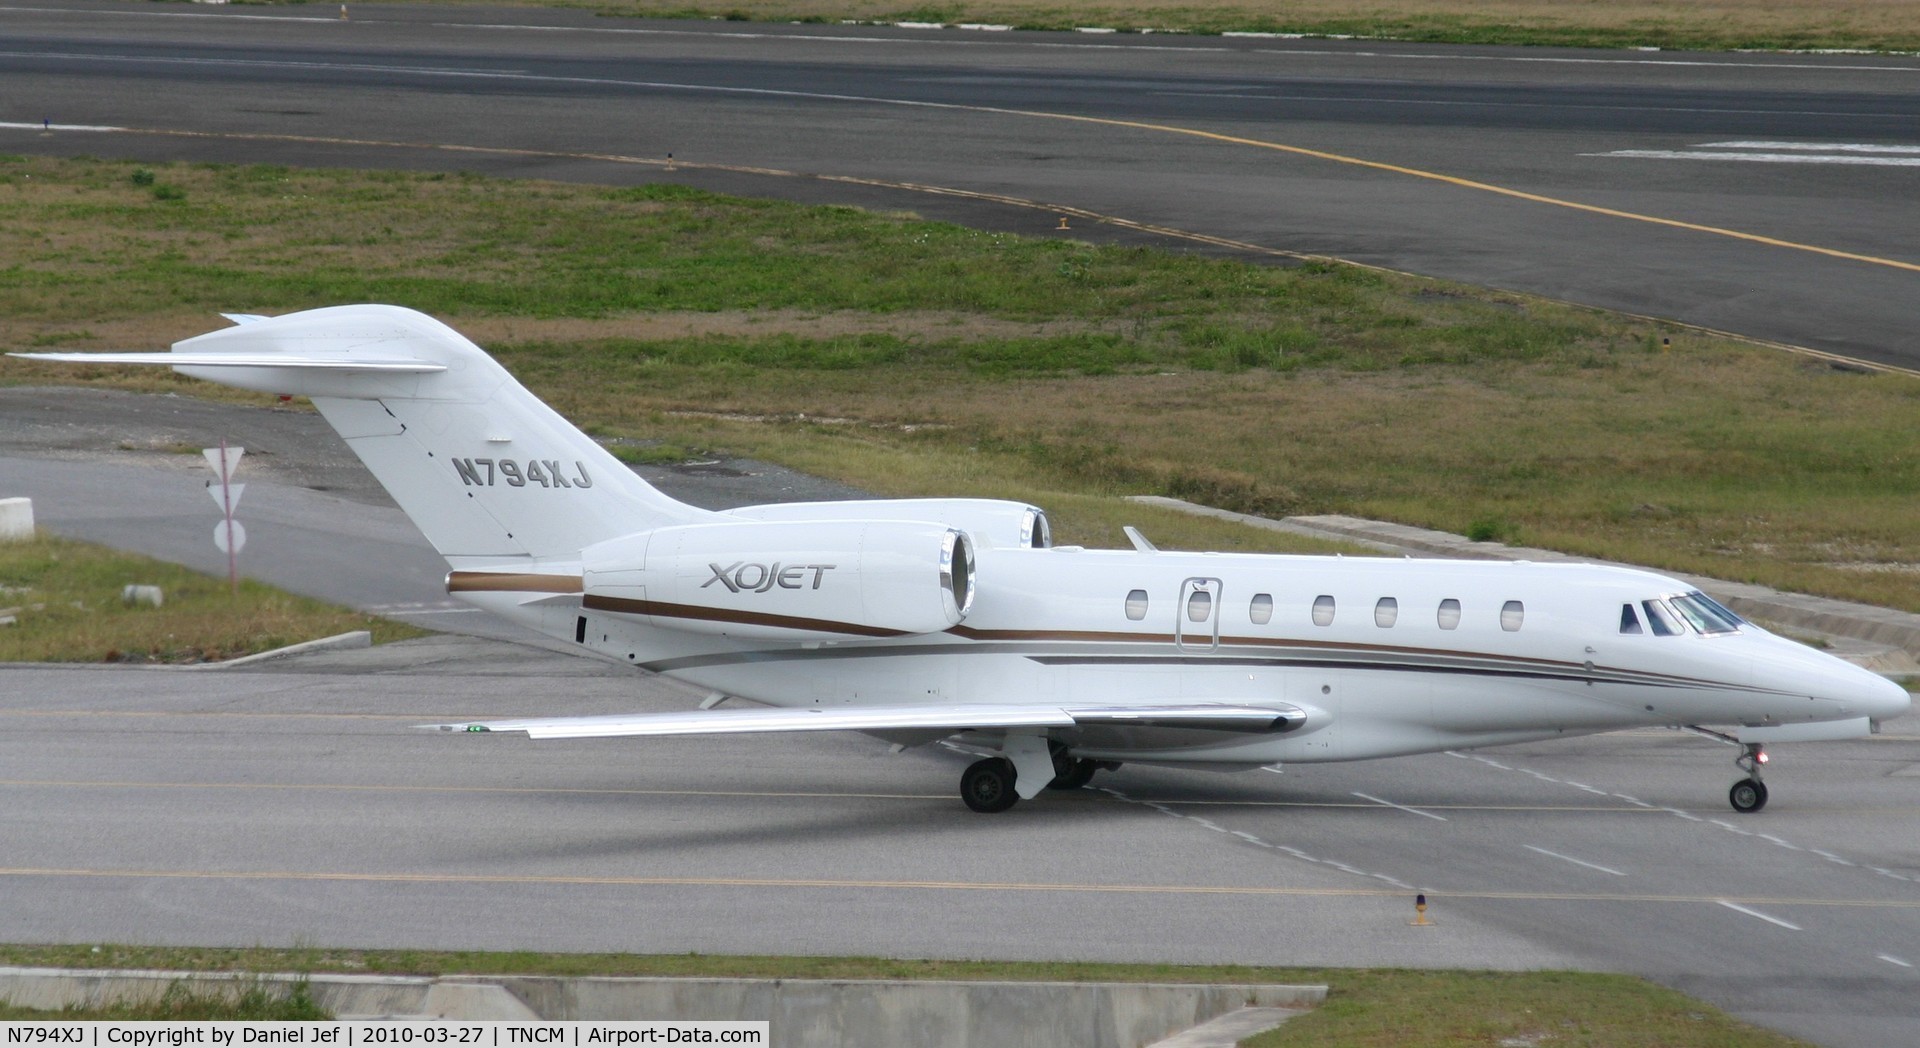 N794XJ, 2008 Cessna 750 Citation X C/N 750-0294, N794XJ taxing on the bypass for the holding point alpha at TNCM